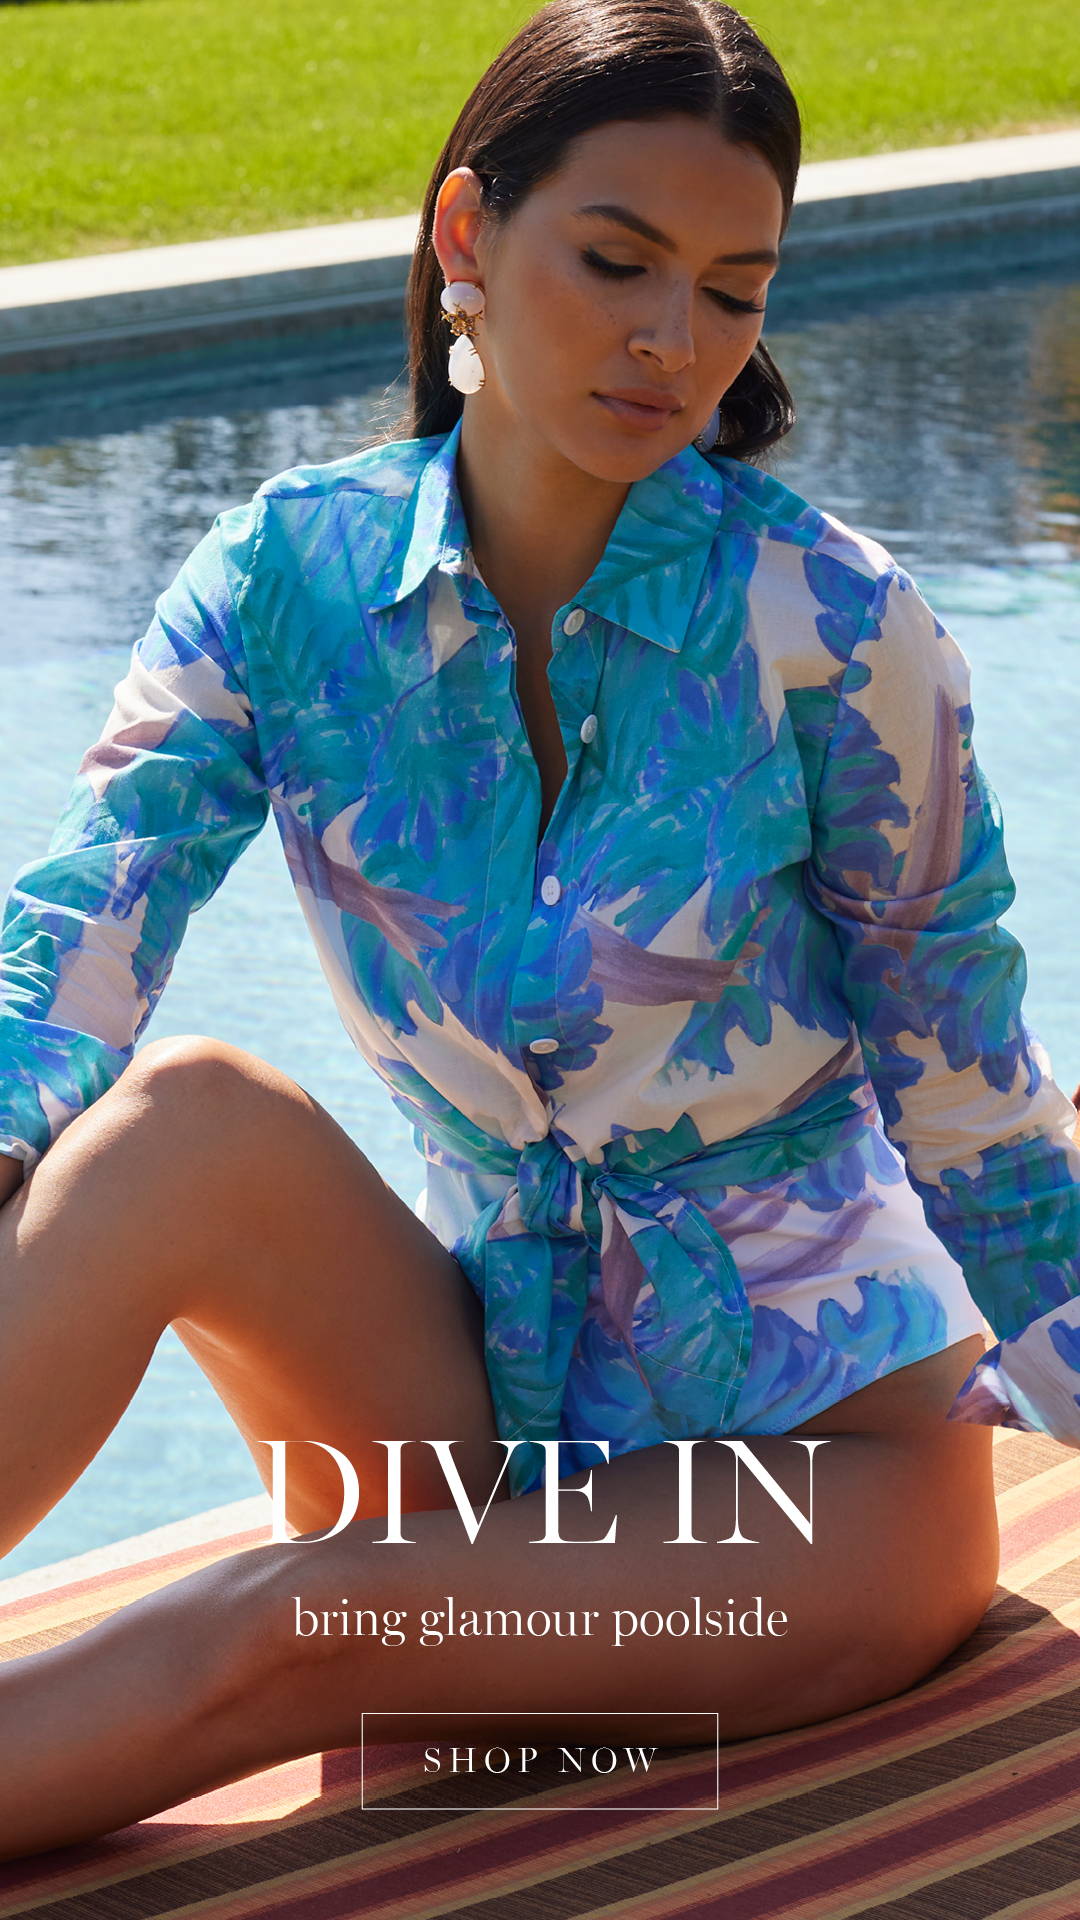 DIVE IN | bring glamour poolside | Woman sitting poolside wearing blue floral printed swimsuit with matching cotton shirt | Shop Now